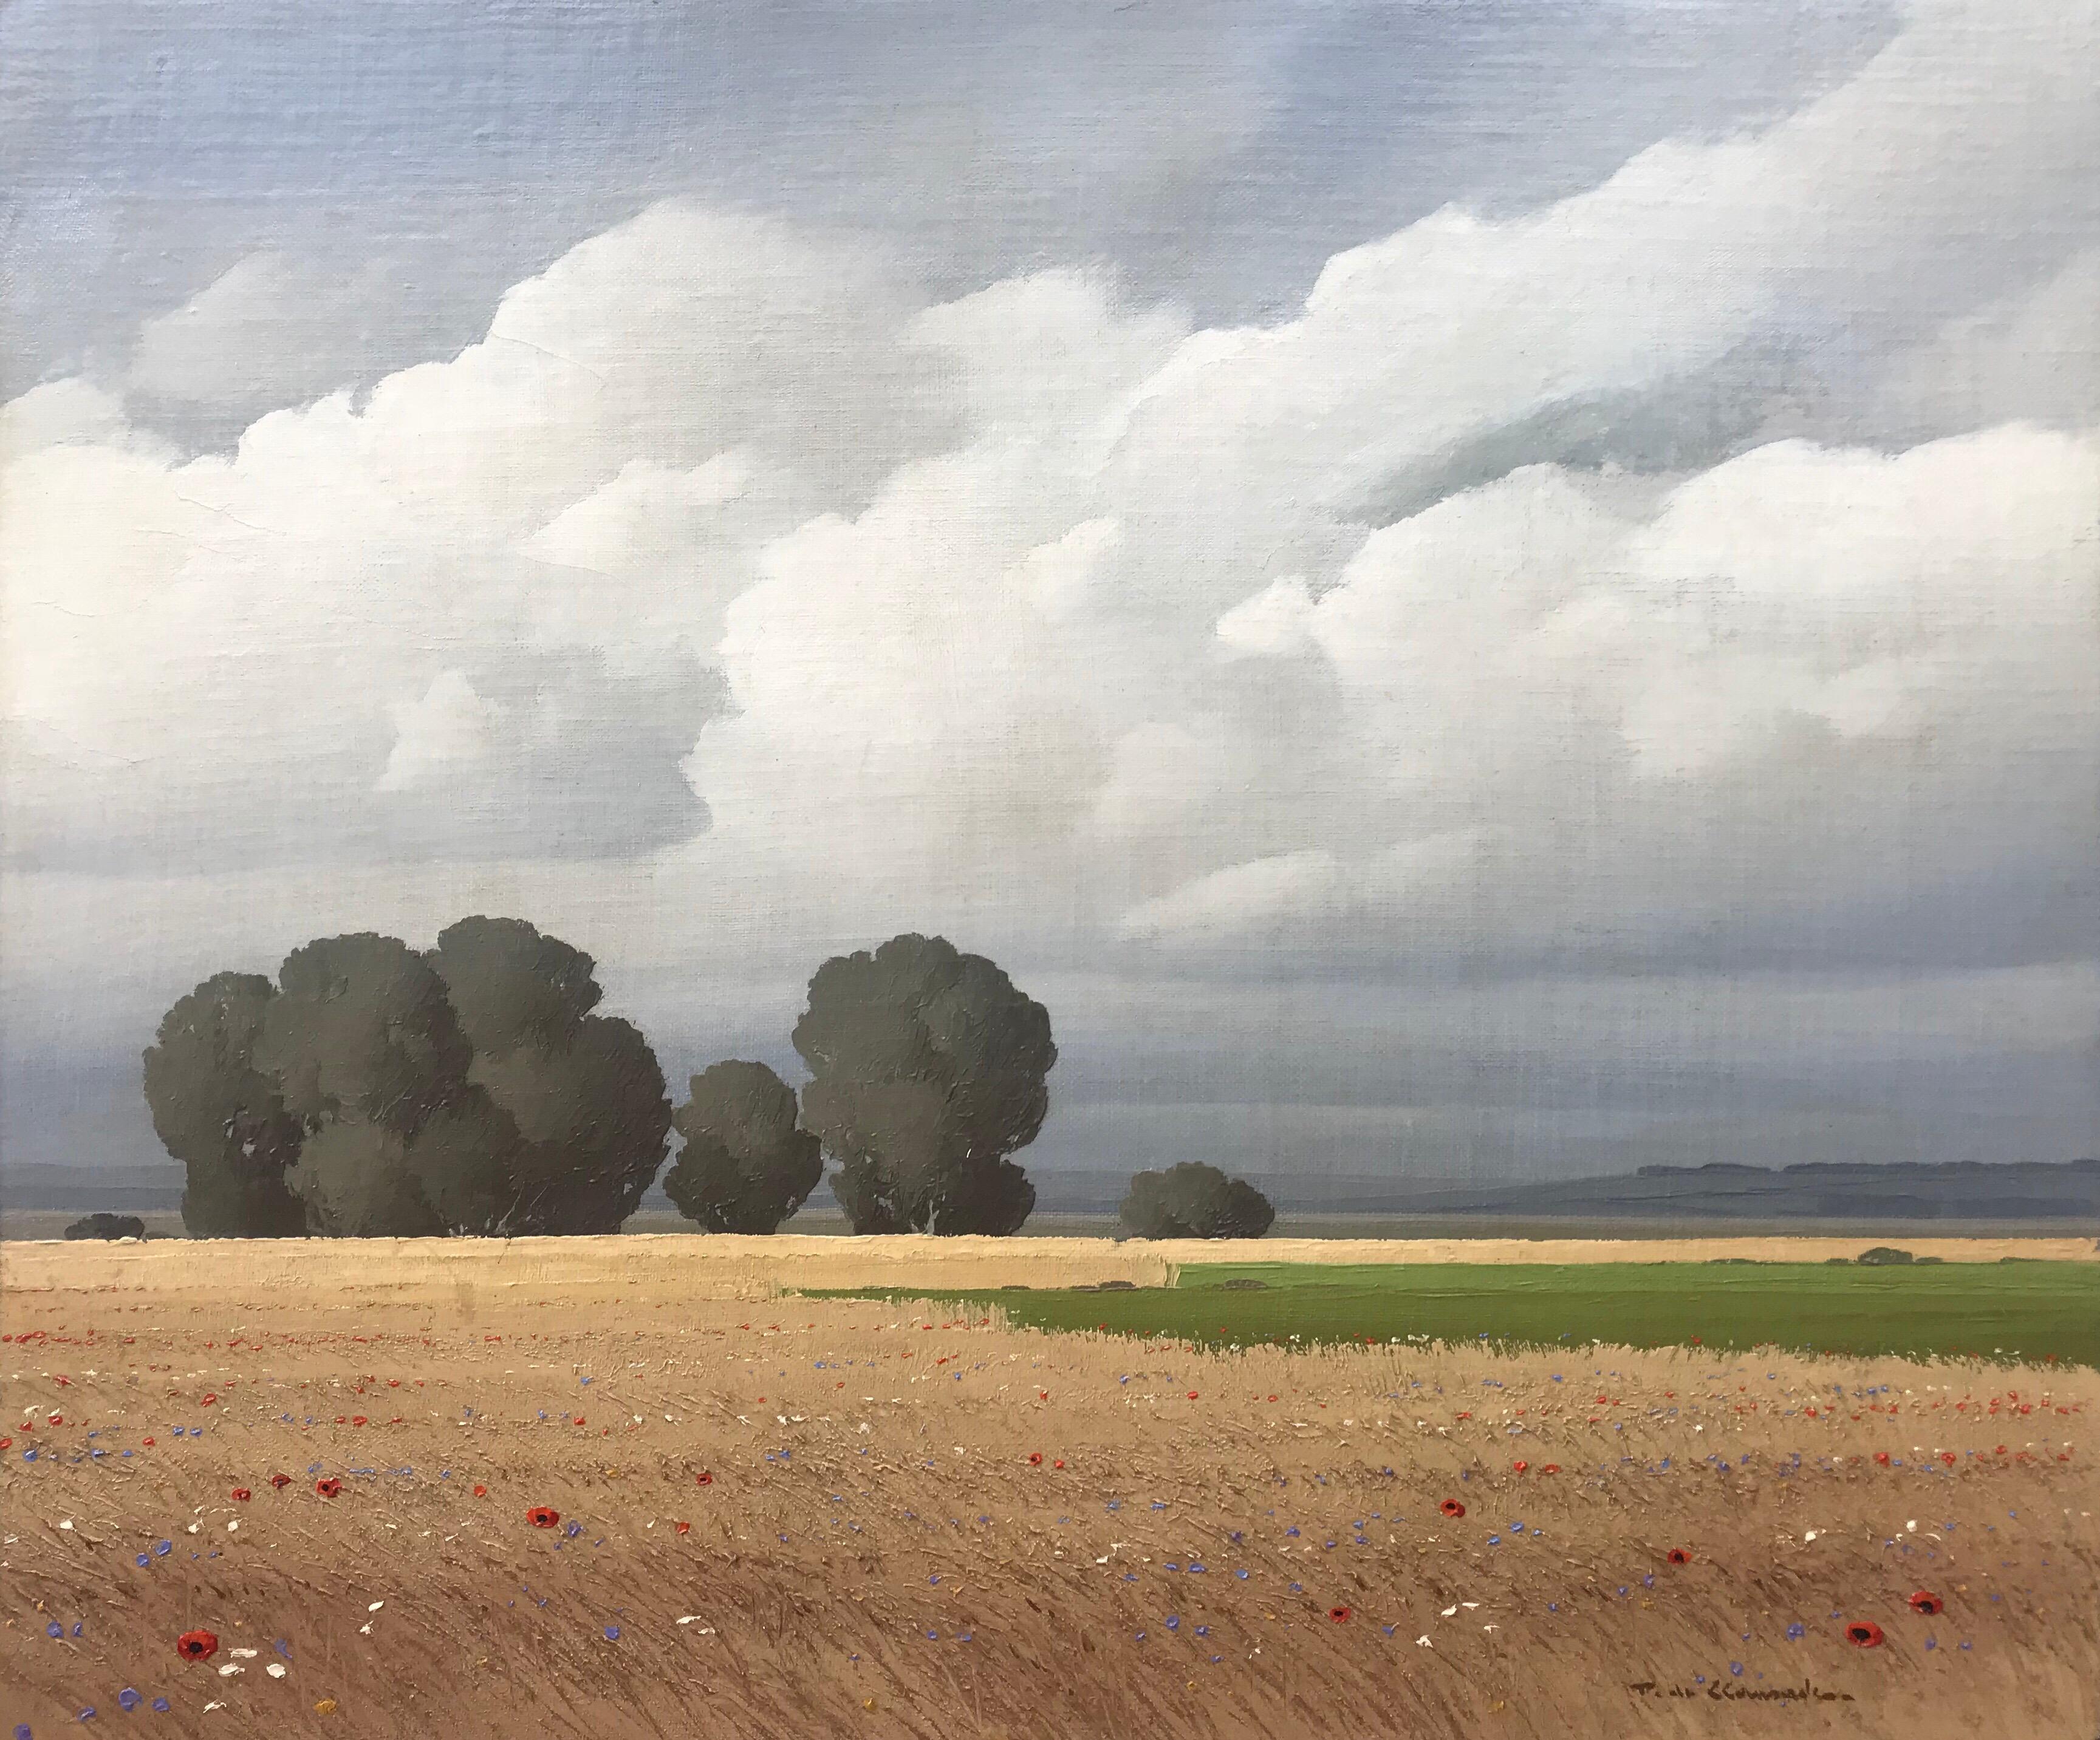 Wheat Fields and Poppies with Clouds Landscape Oil Painting by French Artist - Gray Landscape Painting by Pierre de Clausade